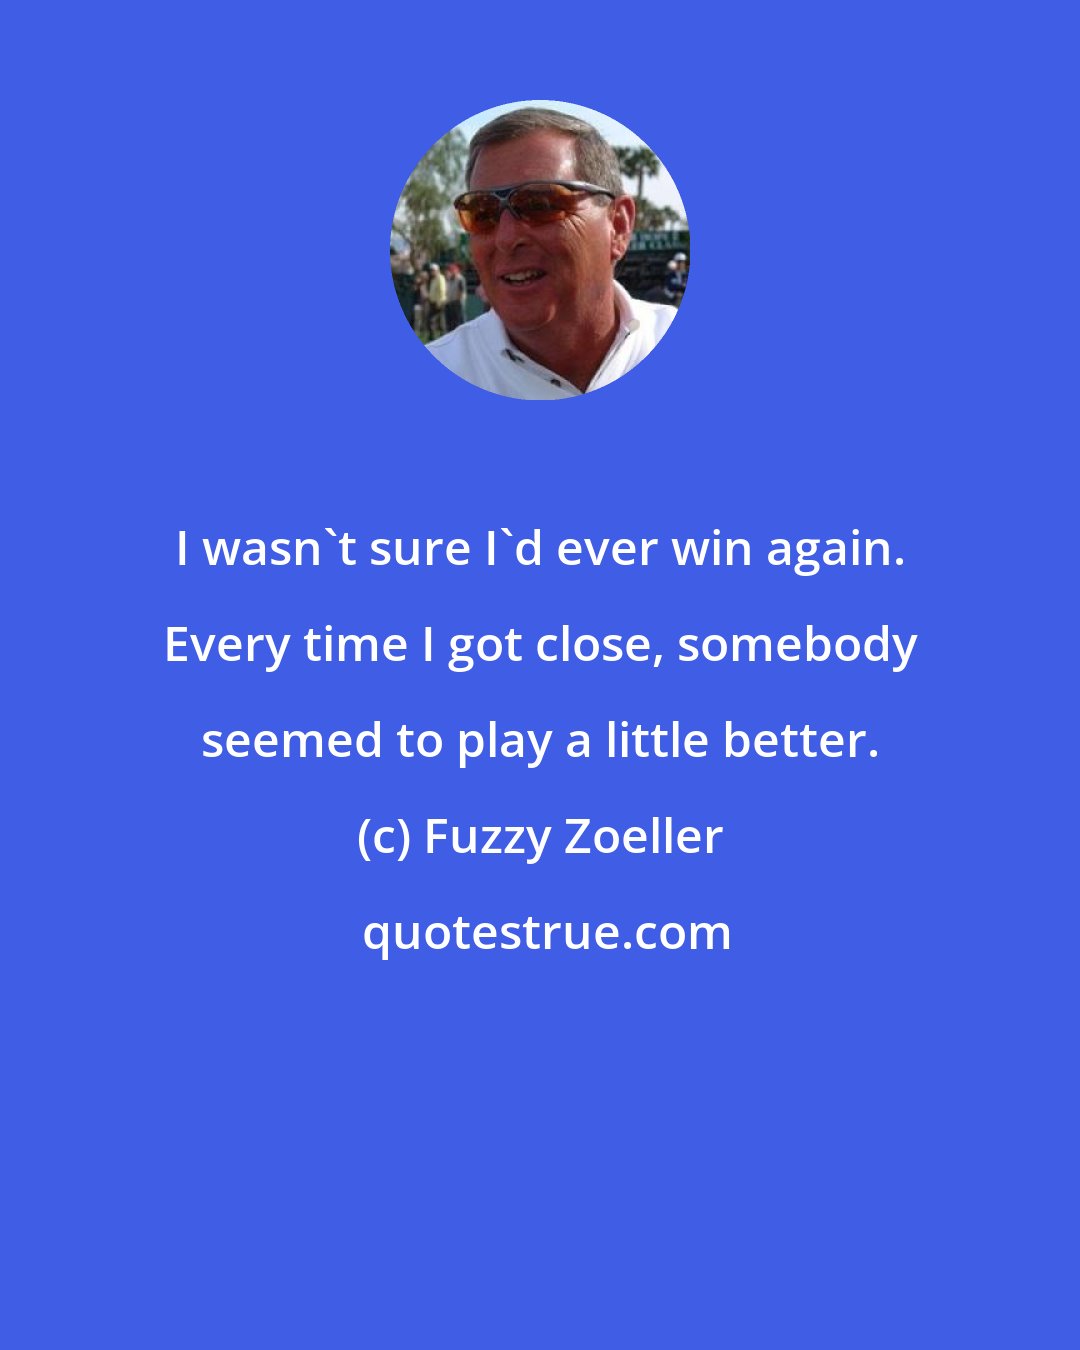 Fuzzy Zoeller: I wasn't sure I'd ever win again. Every time I got close, somebody seemed to play a little better.